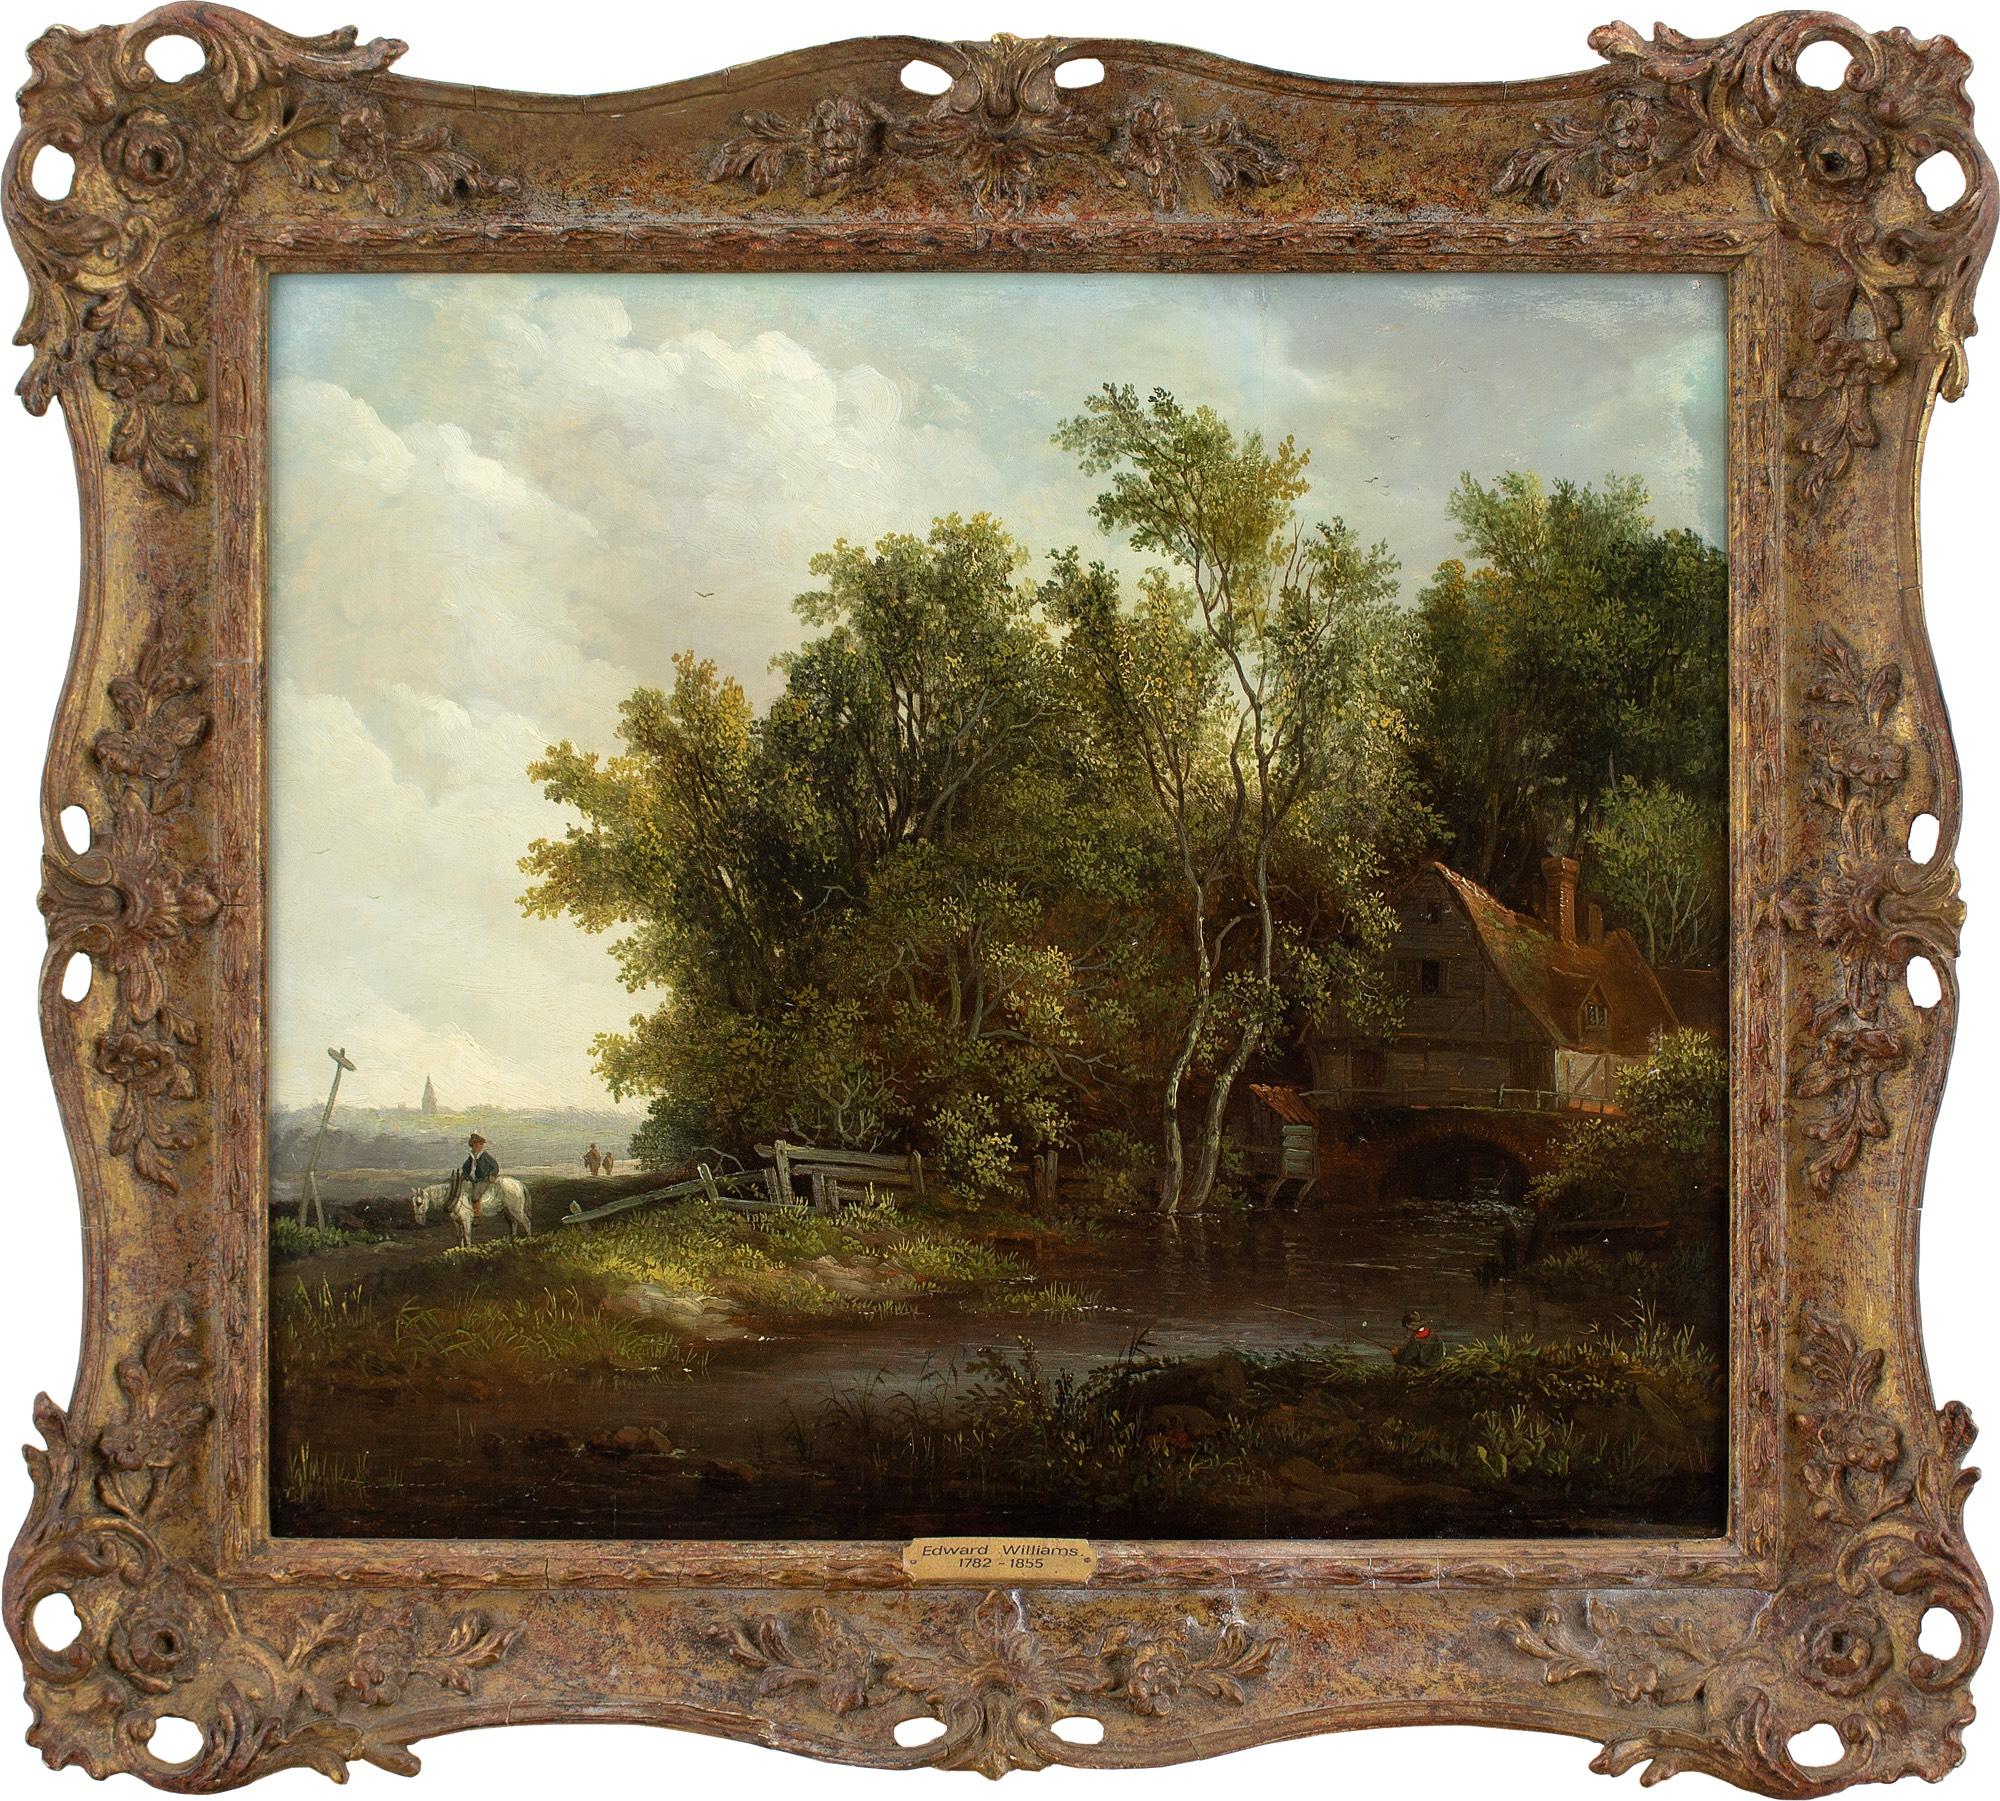 This early 19th-century oil painting by British artist Edward Williams (1782-1855) depicts a rugged landscape with a watermill, stream and figures.

On the right, the sound of an old mill provides a continuous backdrop. It turns, grinding grain into